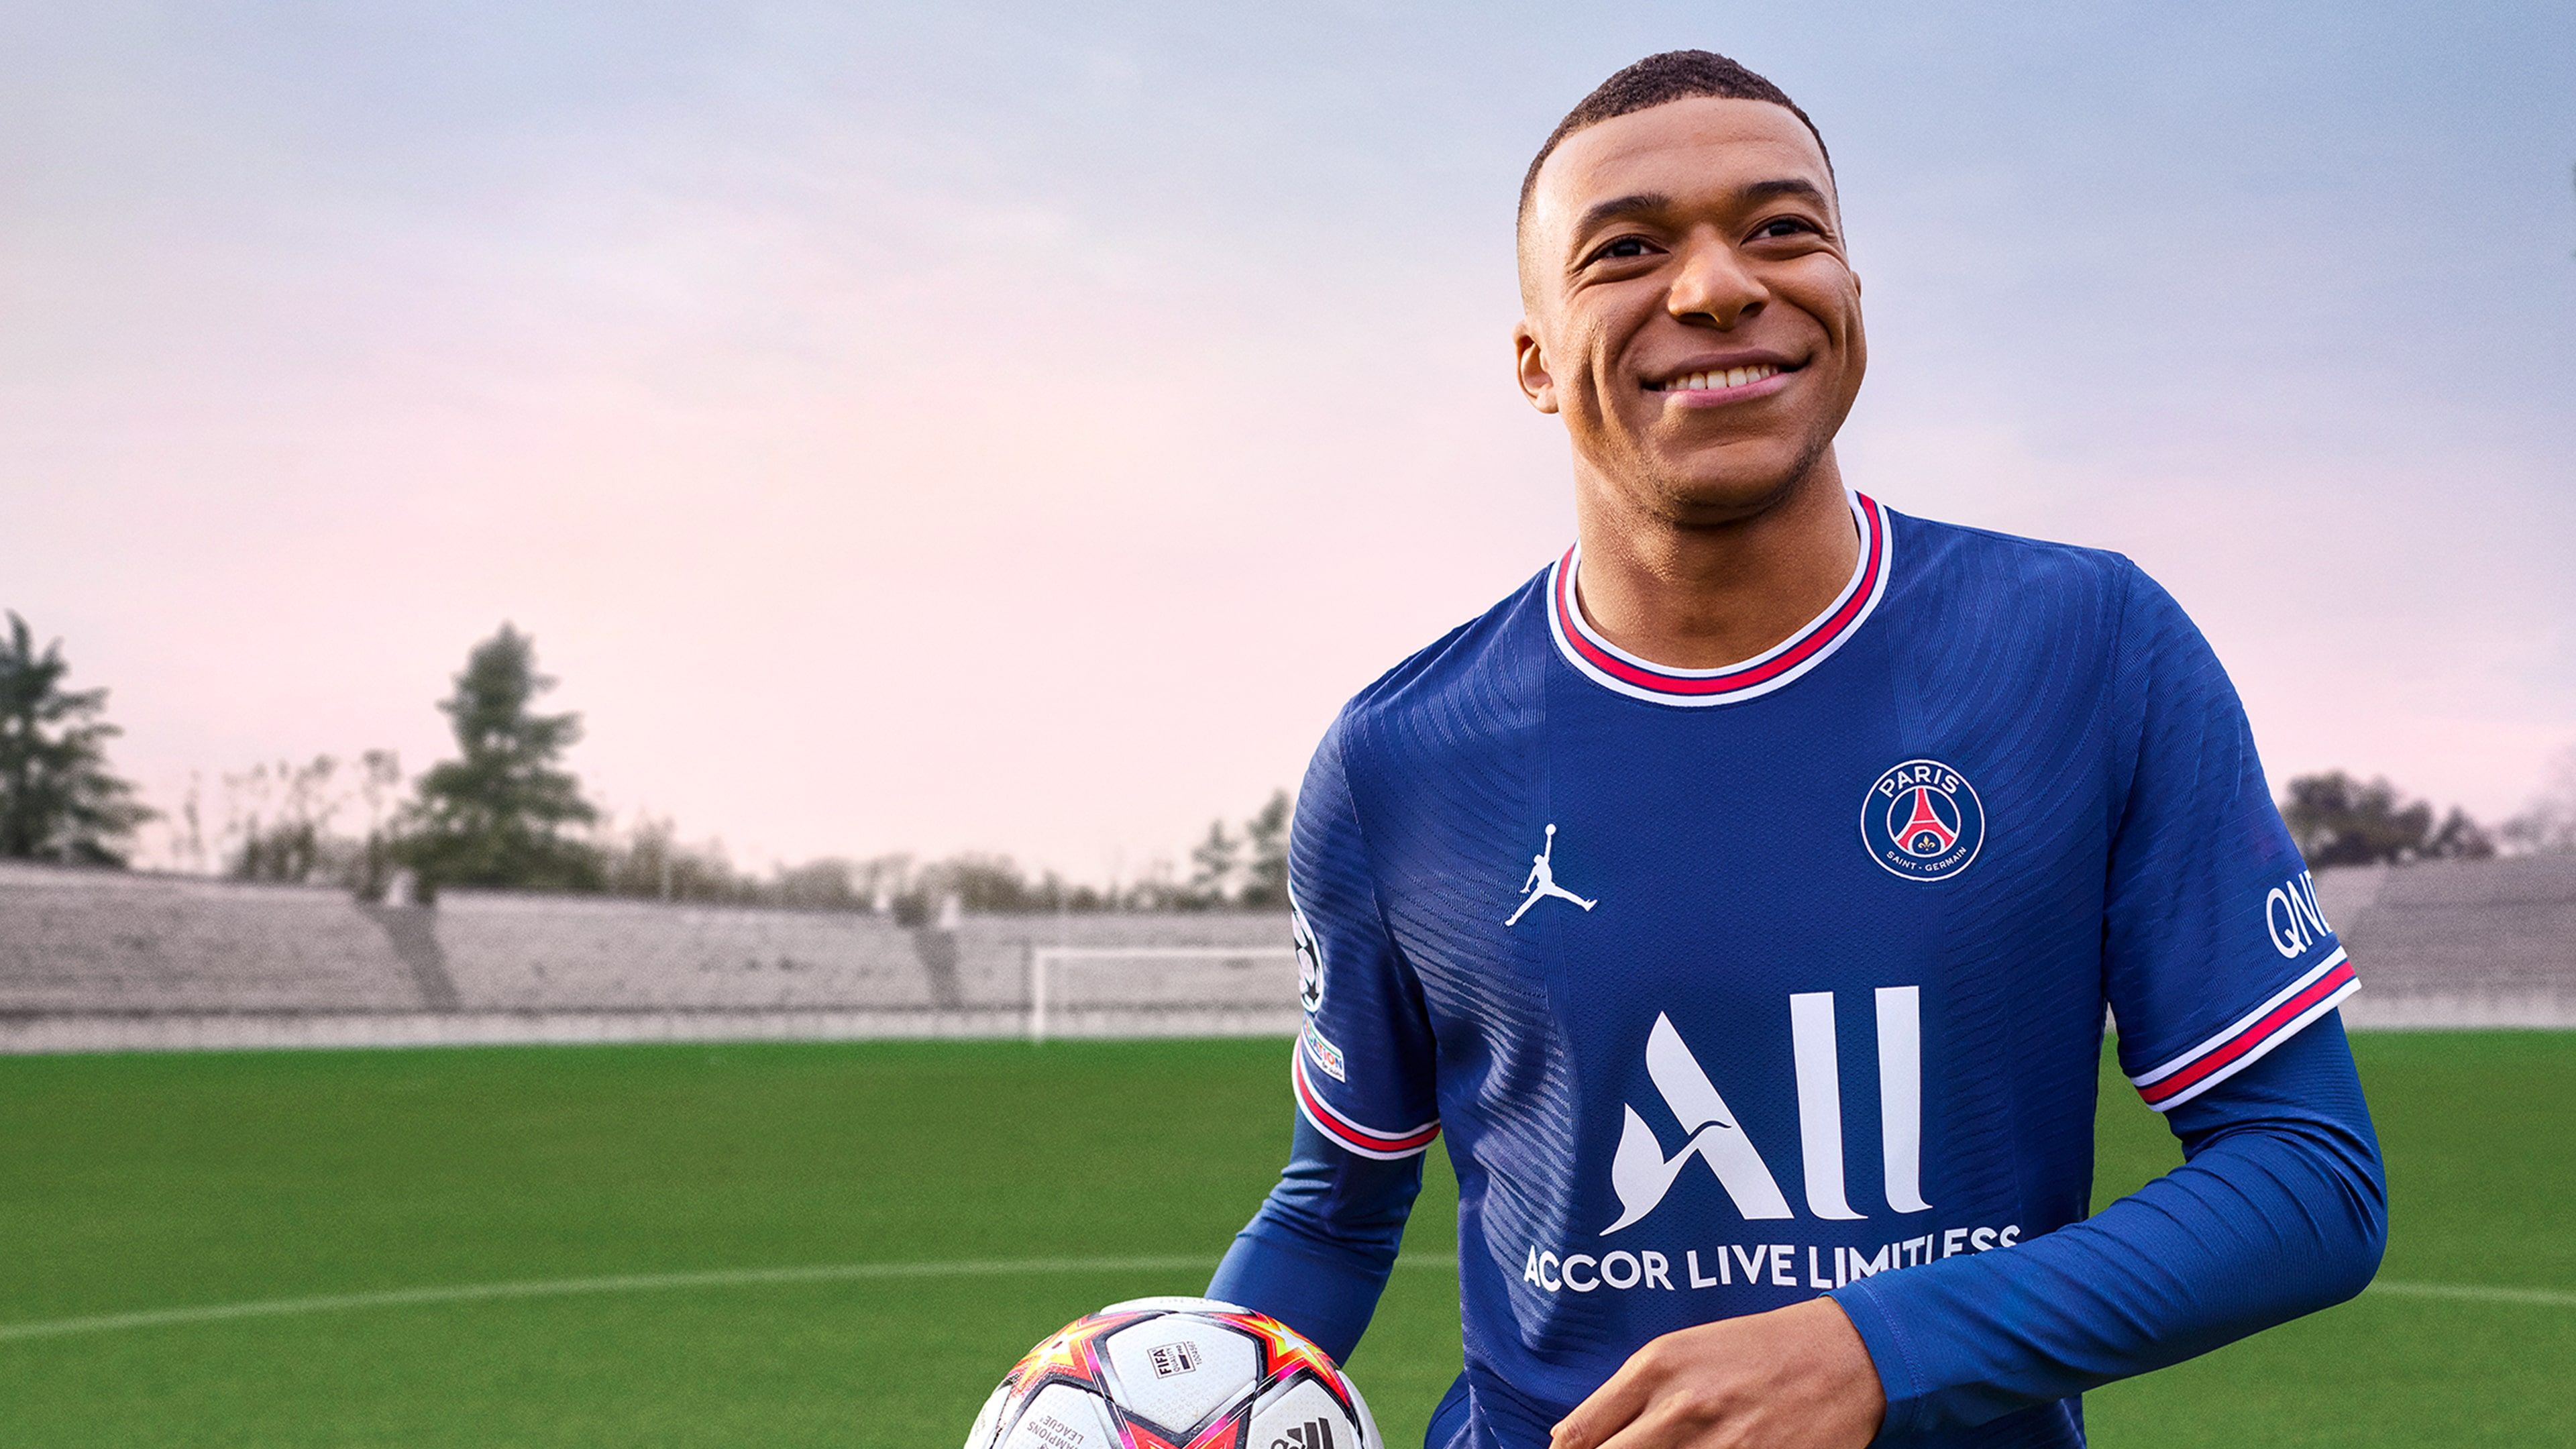 FIFA 22 Trophies cover image